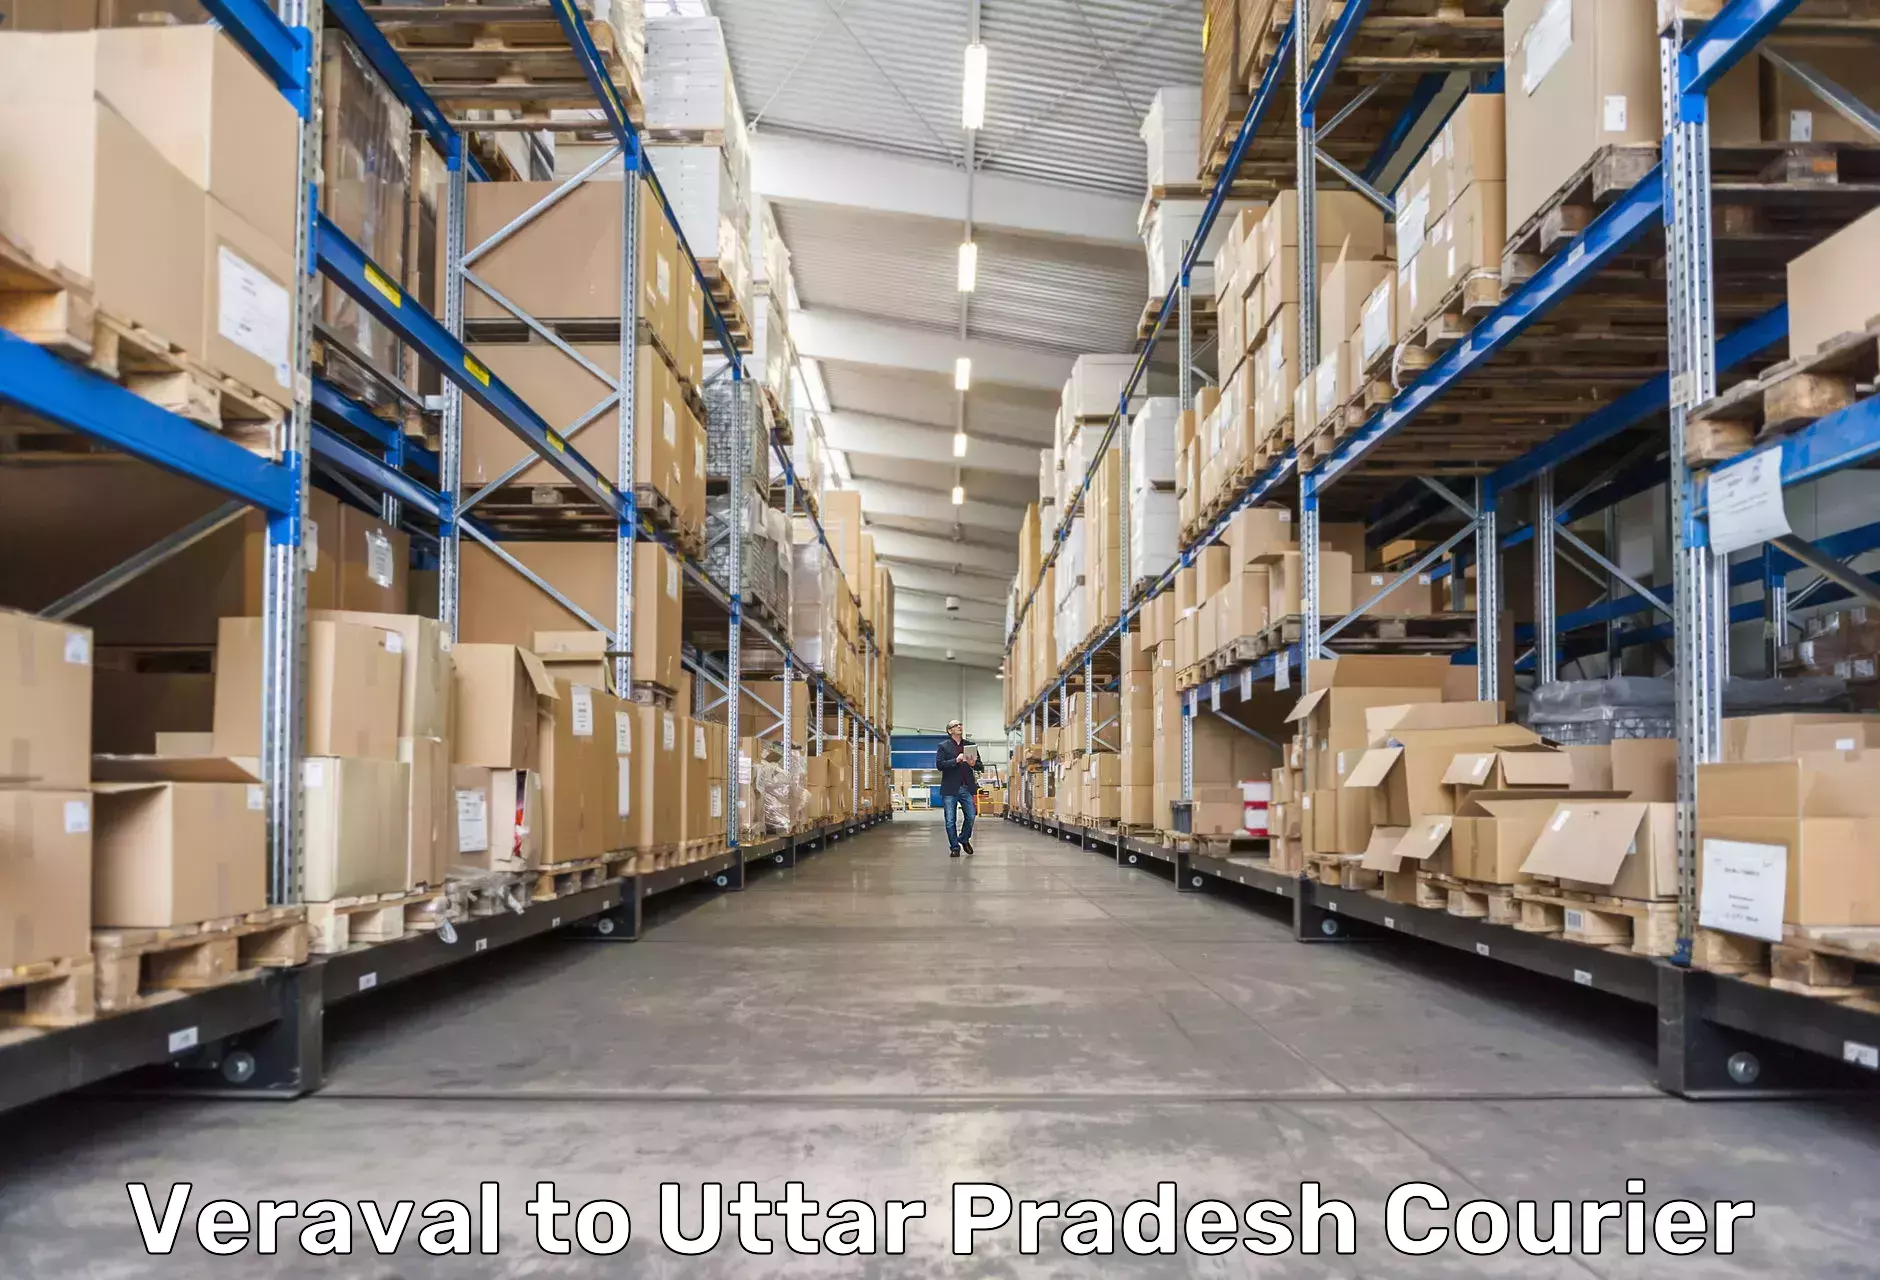 Comprehensive shipping network Veraval to Biswan